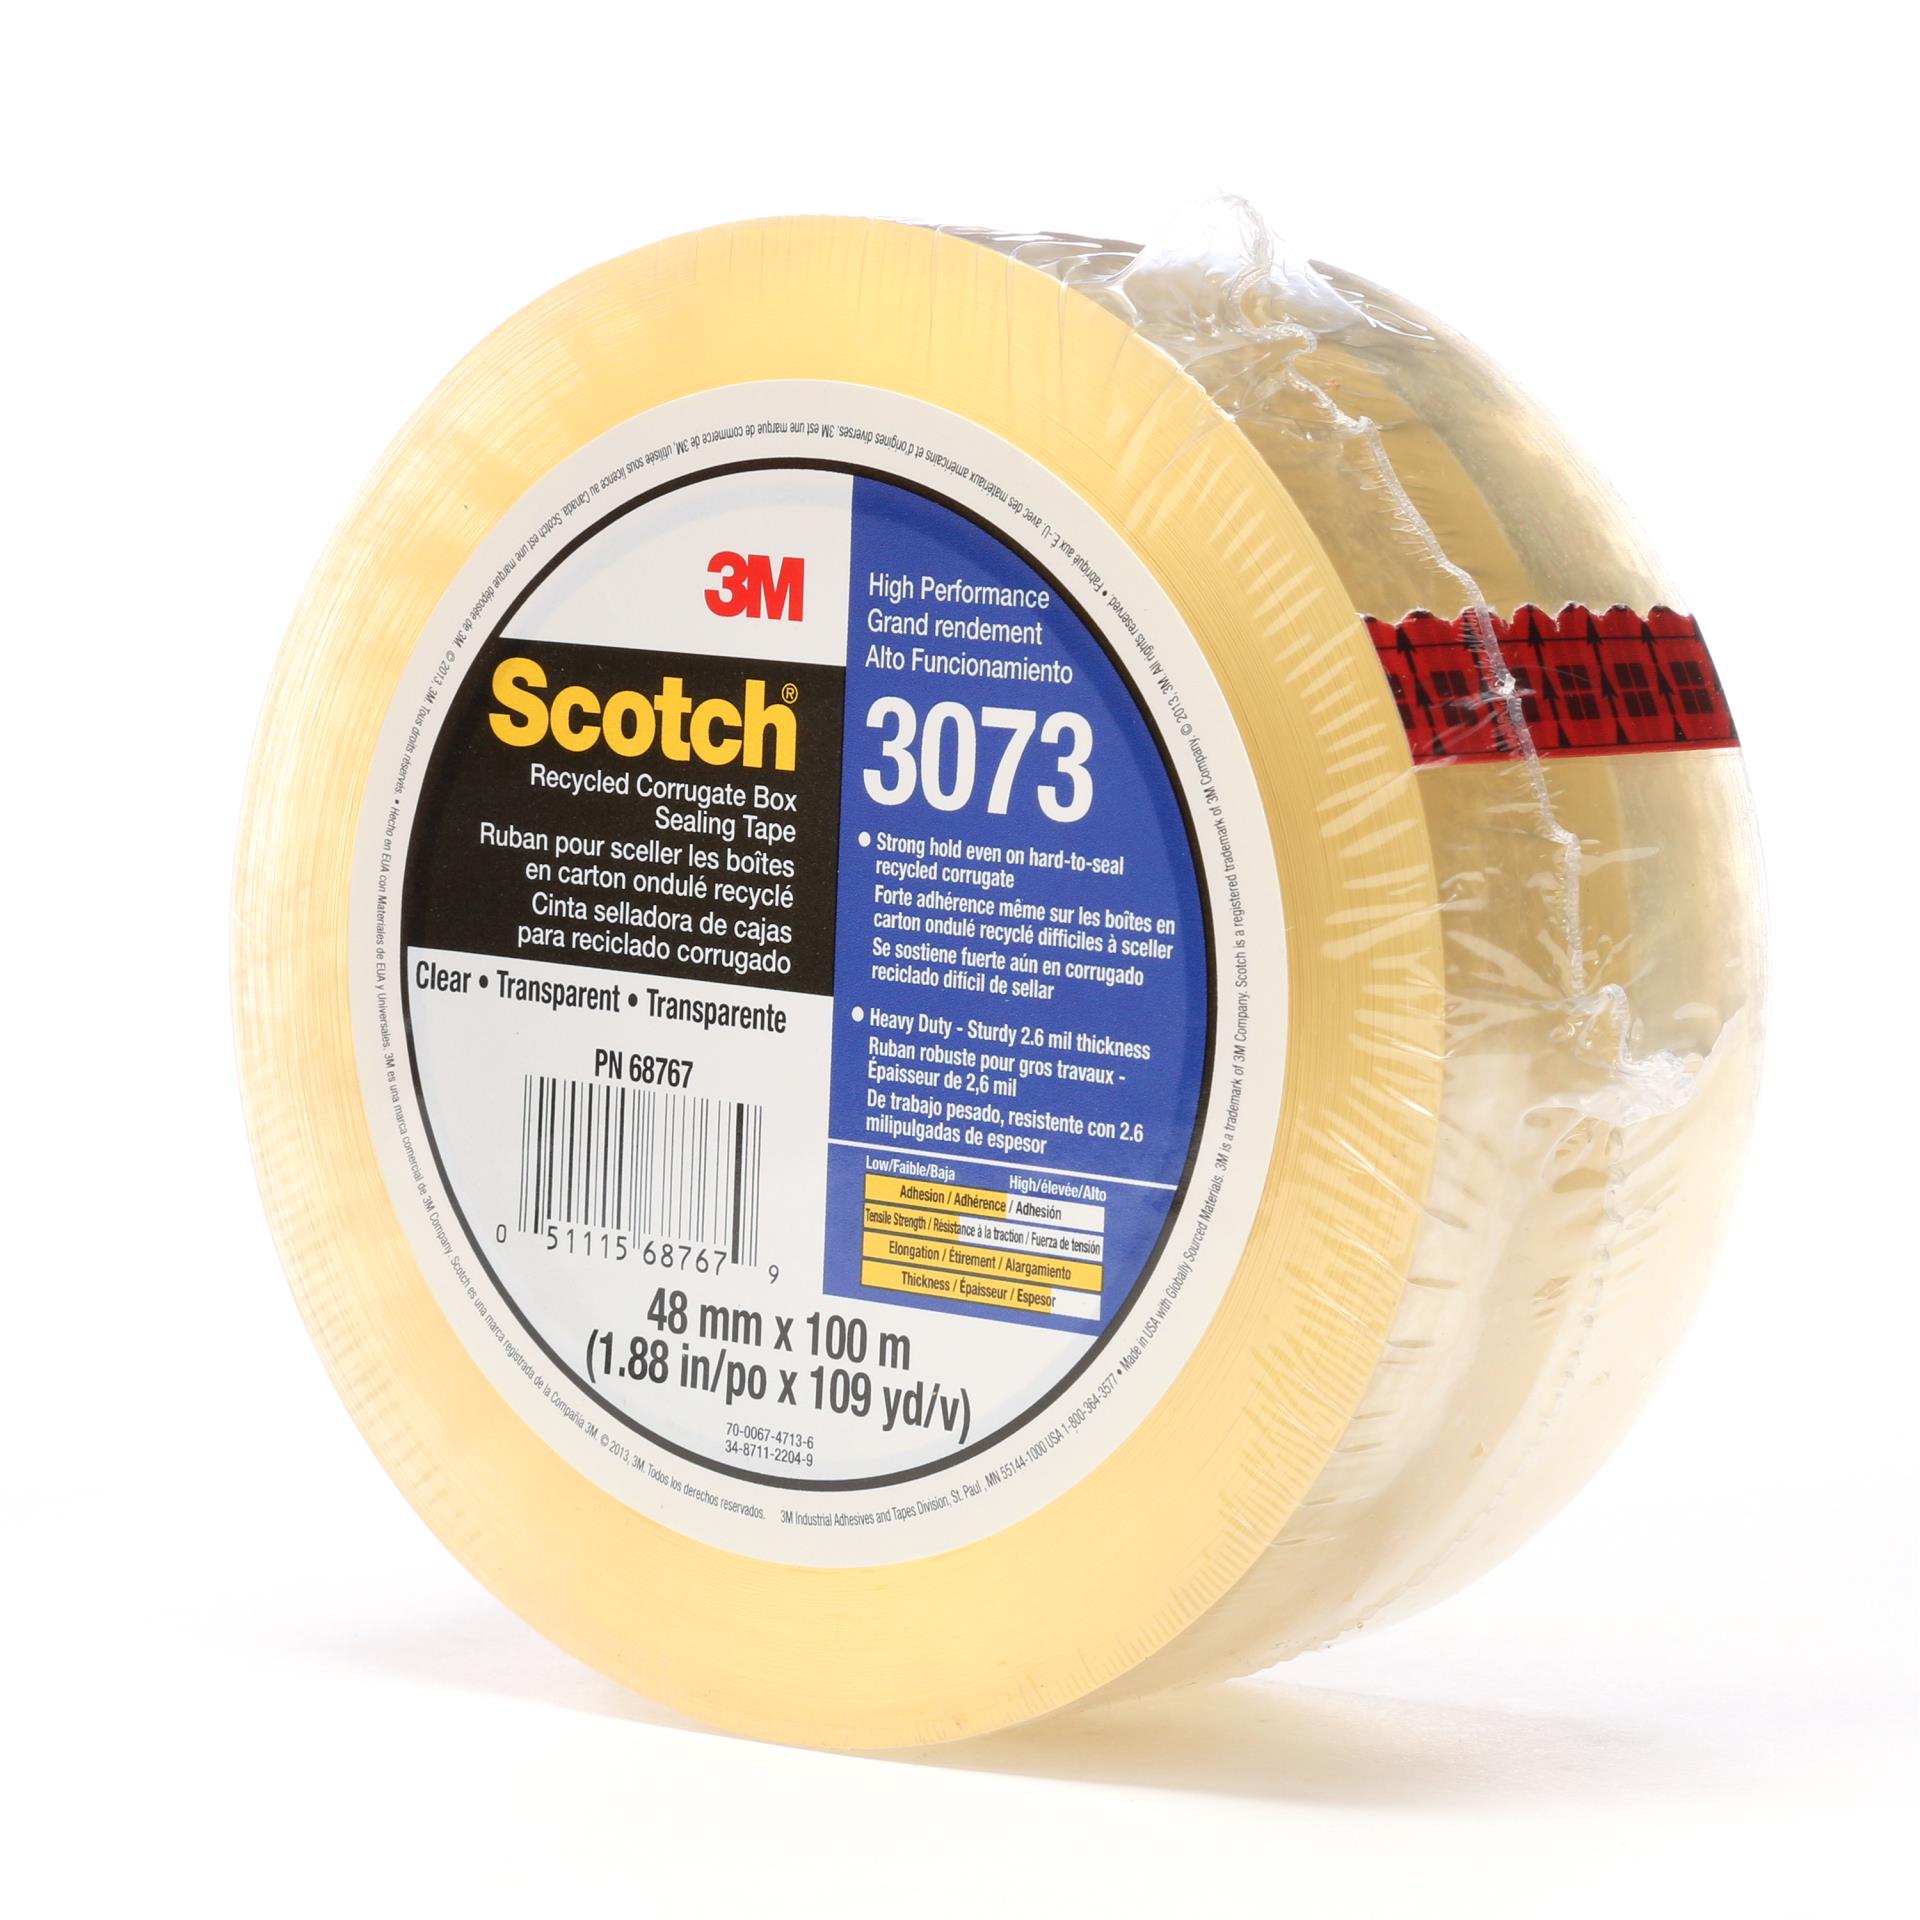 https://e-aircraftsupply.com/ItemImages/84/7010313184_Scotch_Recycled_Corrugate_Box_Sealing_Tape_3073_Clear.jpg